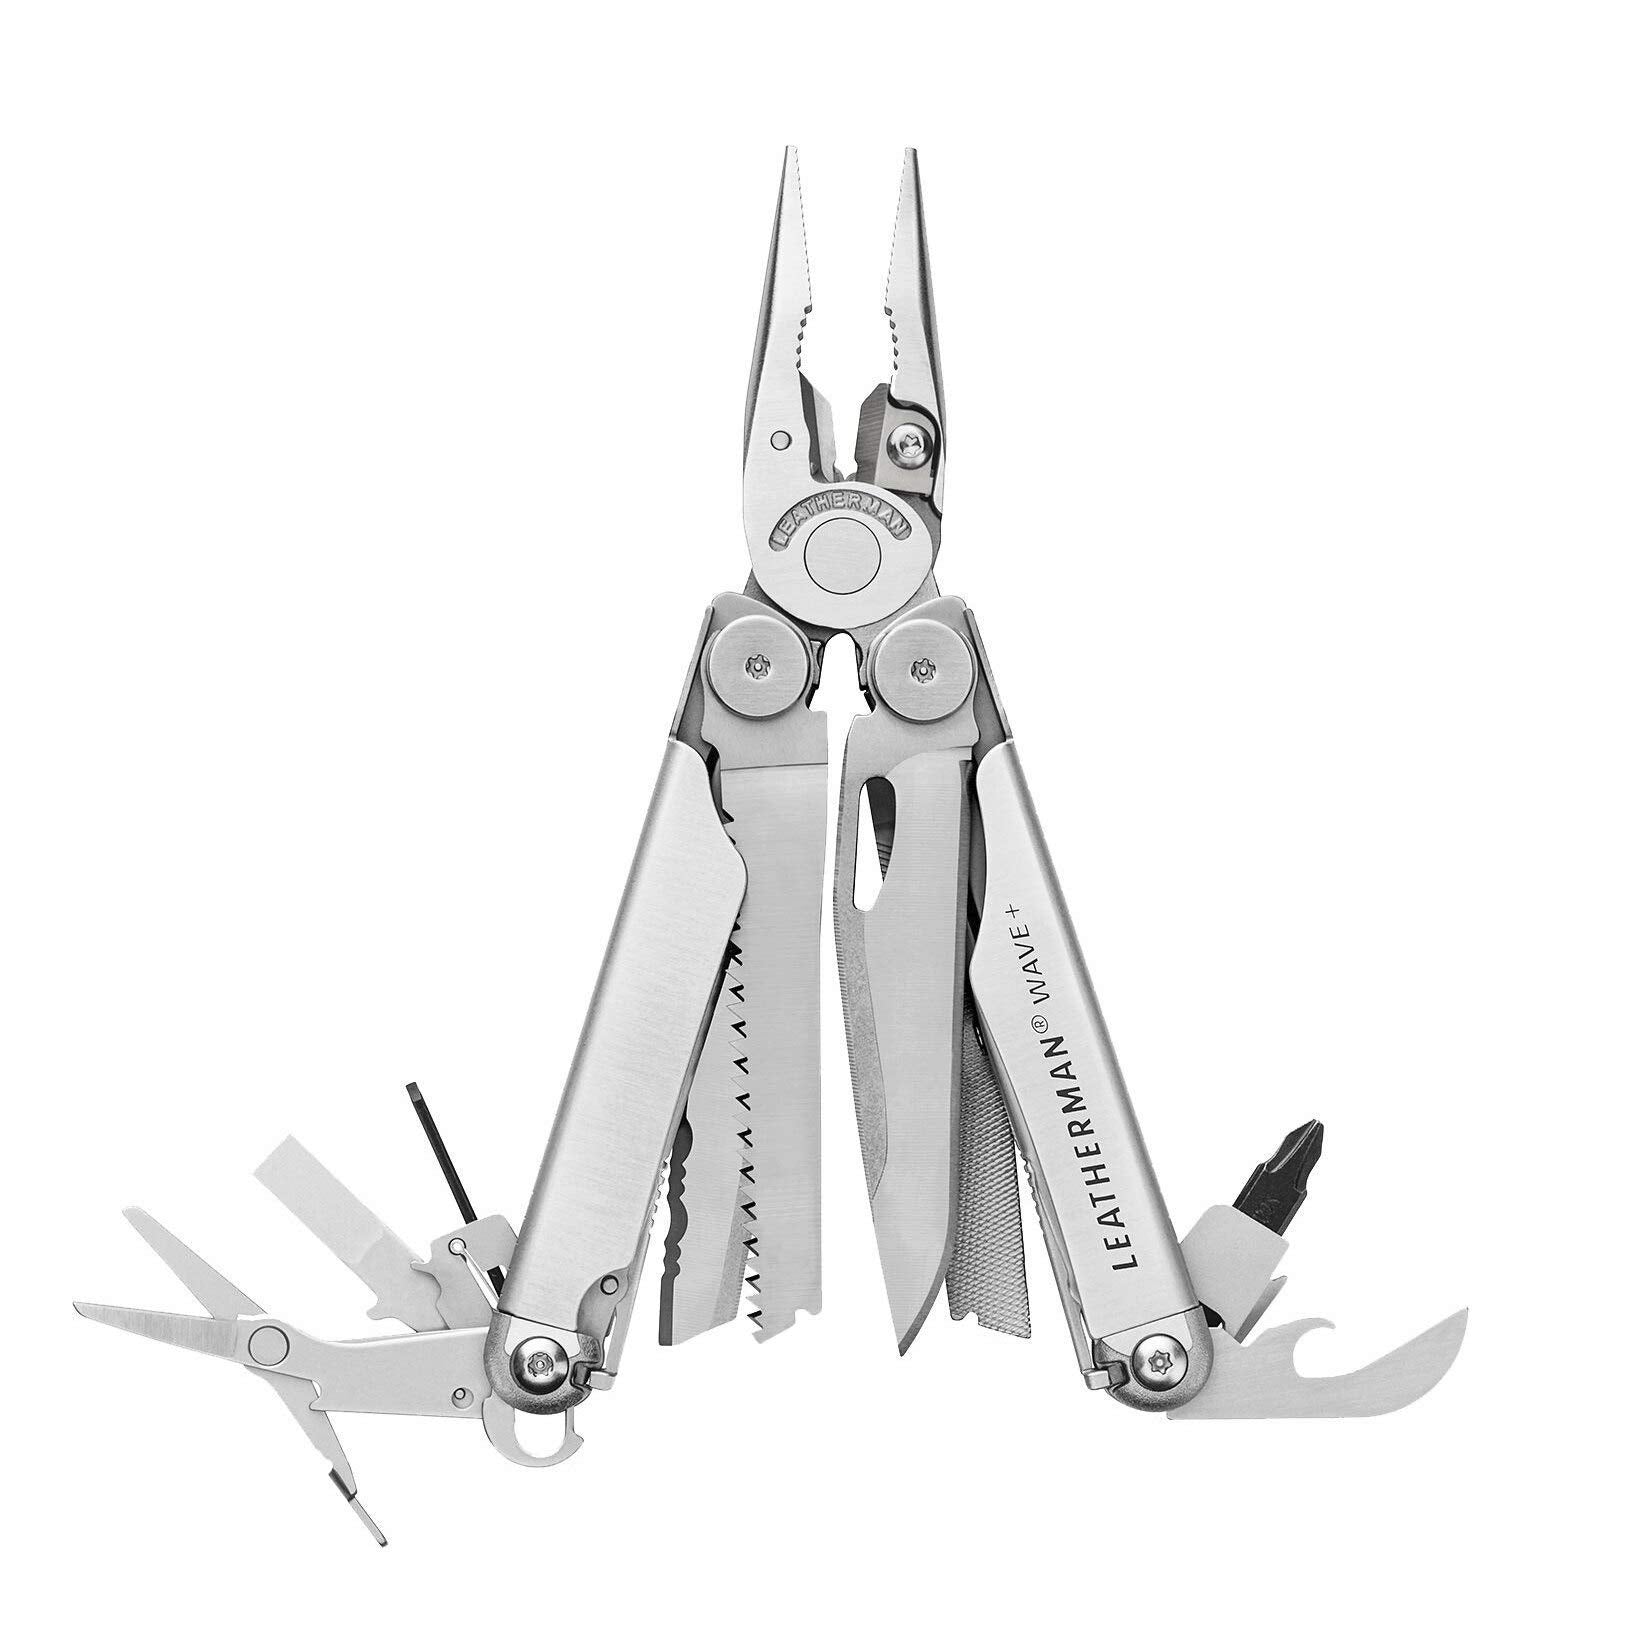 LEATHERMAN Wave Plus - The multi-tool for any task, 18 multipurpose tools with lockable blades for camping, DIY and outdoor adventures made in the USA in stainless steel